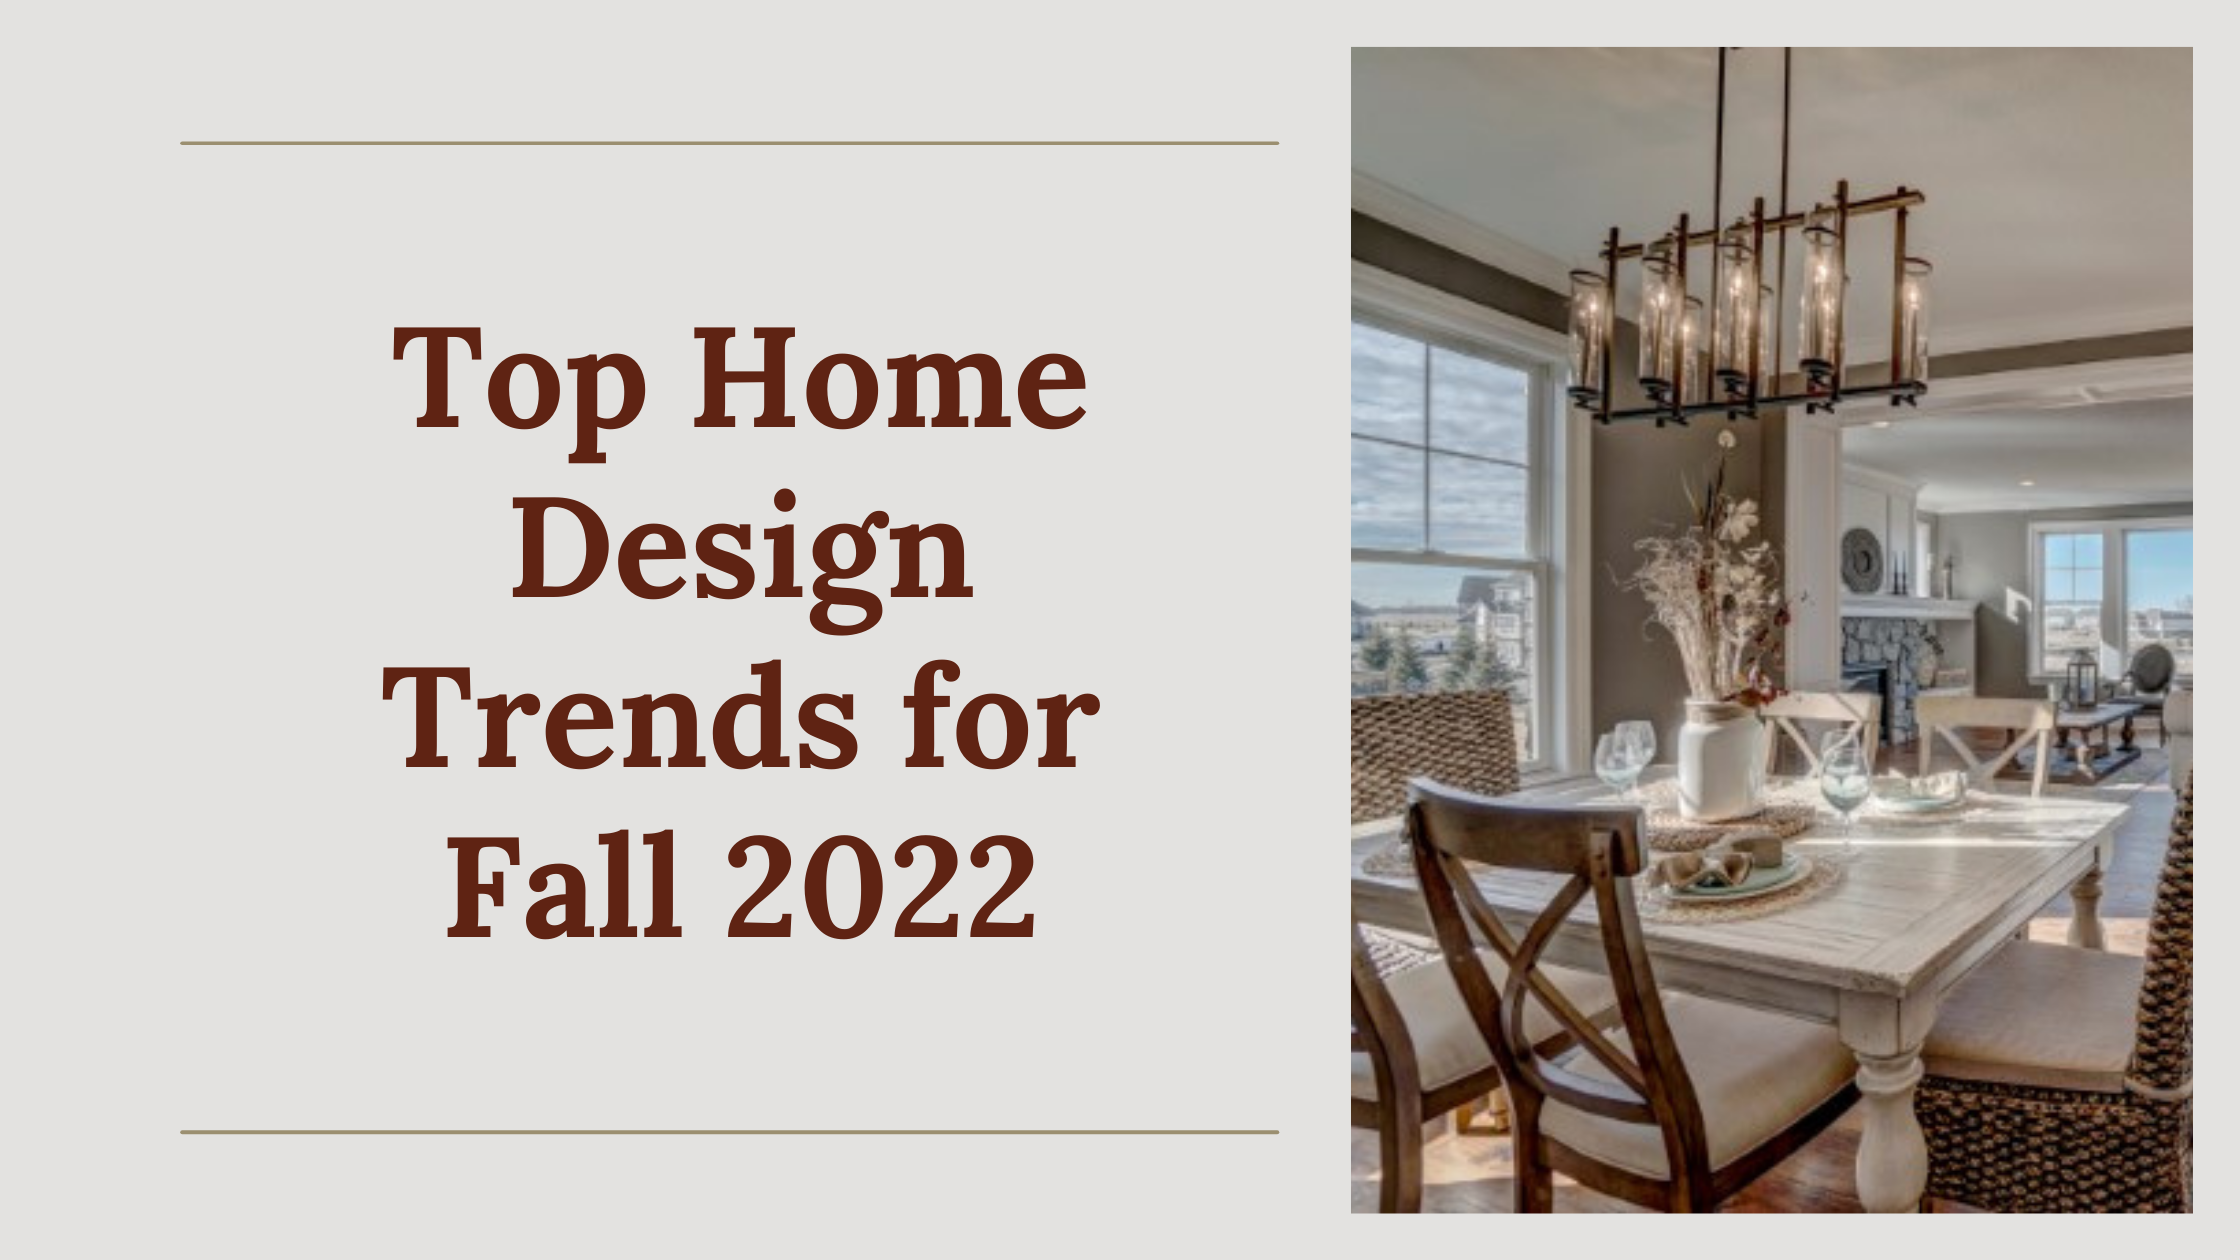 Top Home Design Trends for Fall 